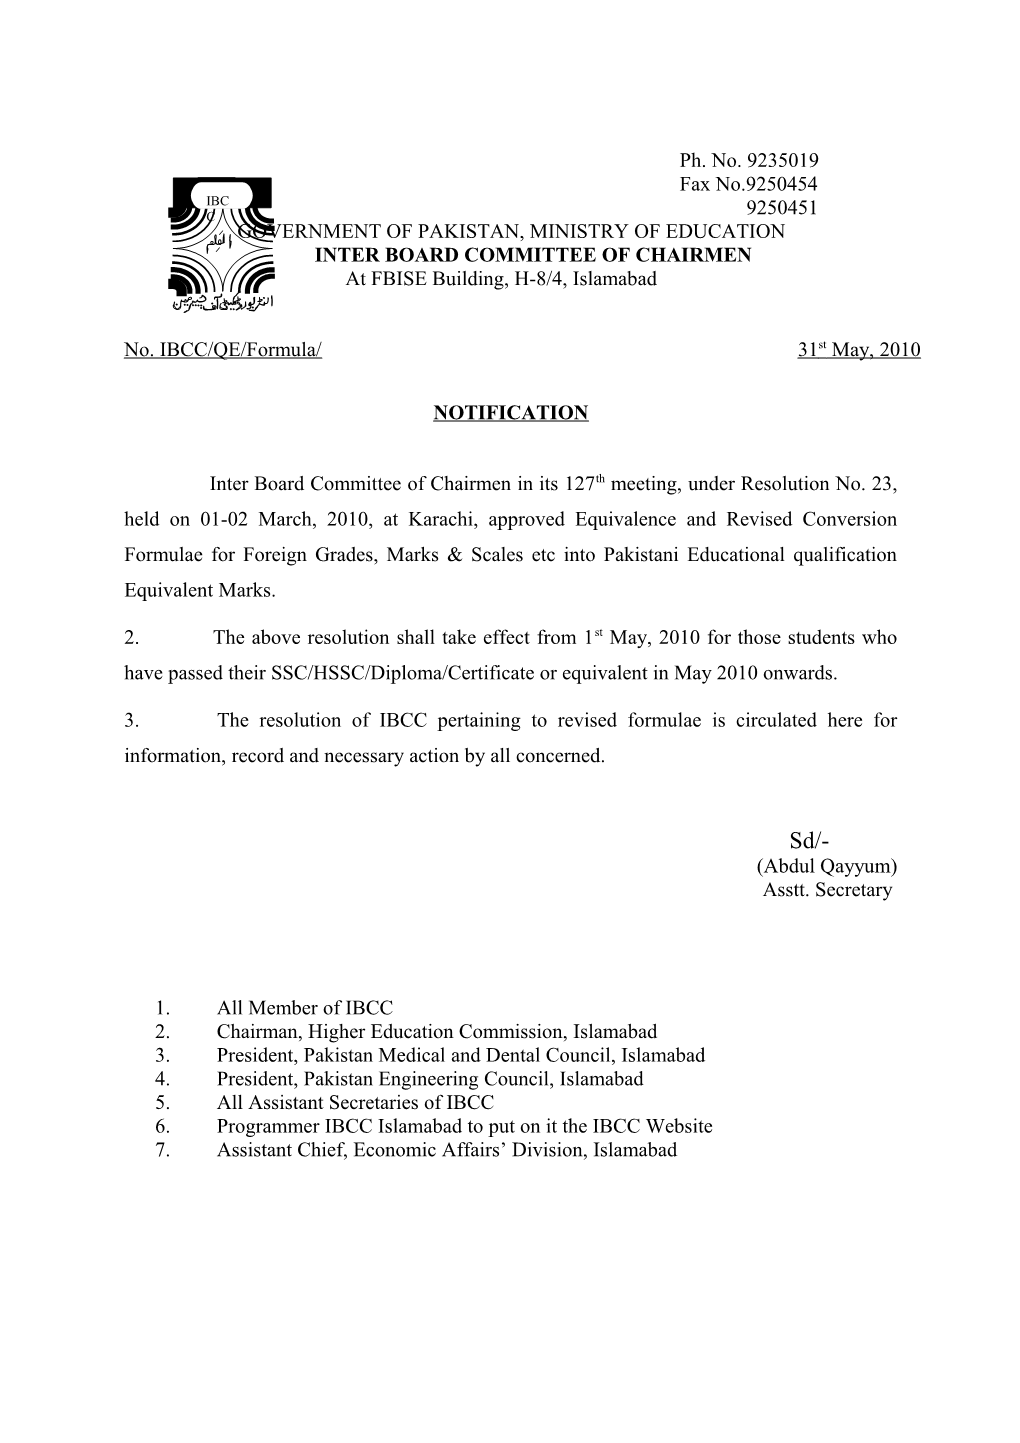 Government of Pakistan, Ministry of Education